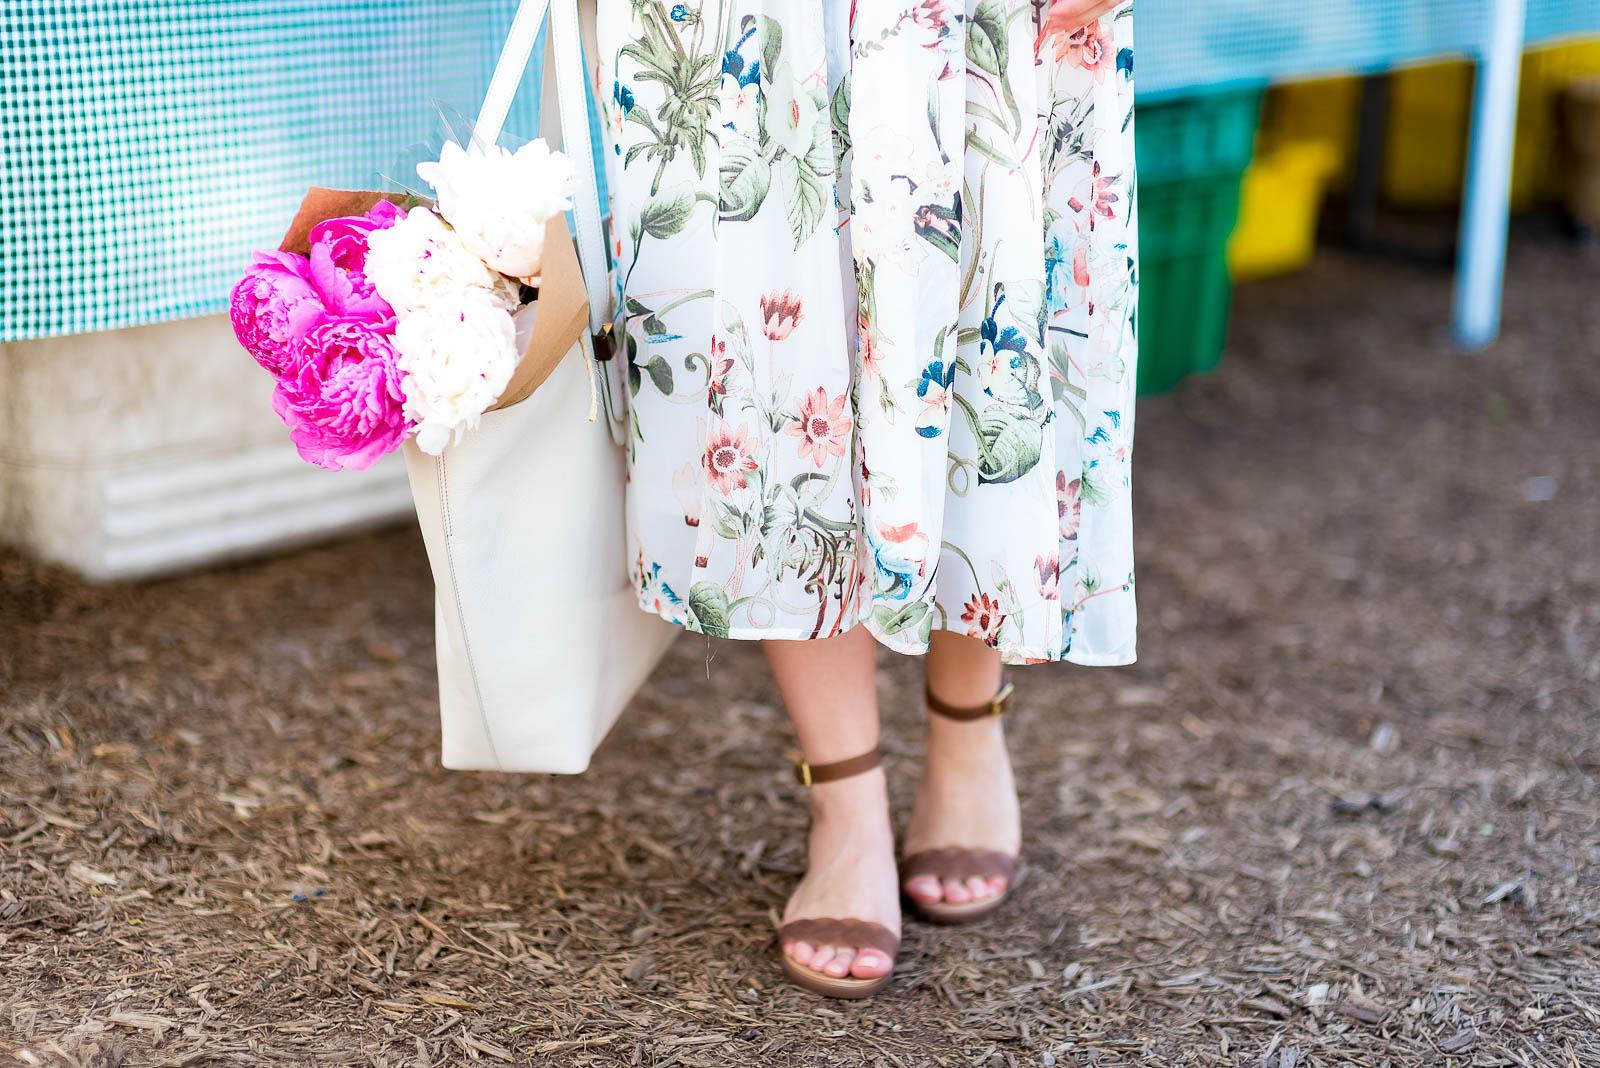 Summer Floral Midi Dress Farmers Market Outfit